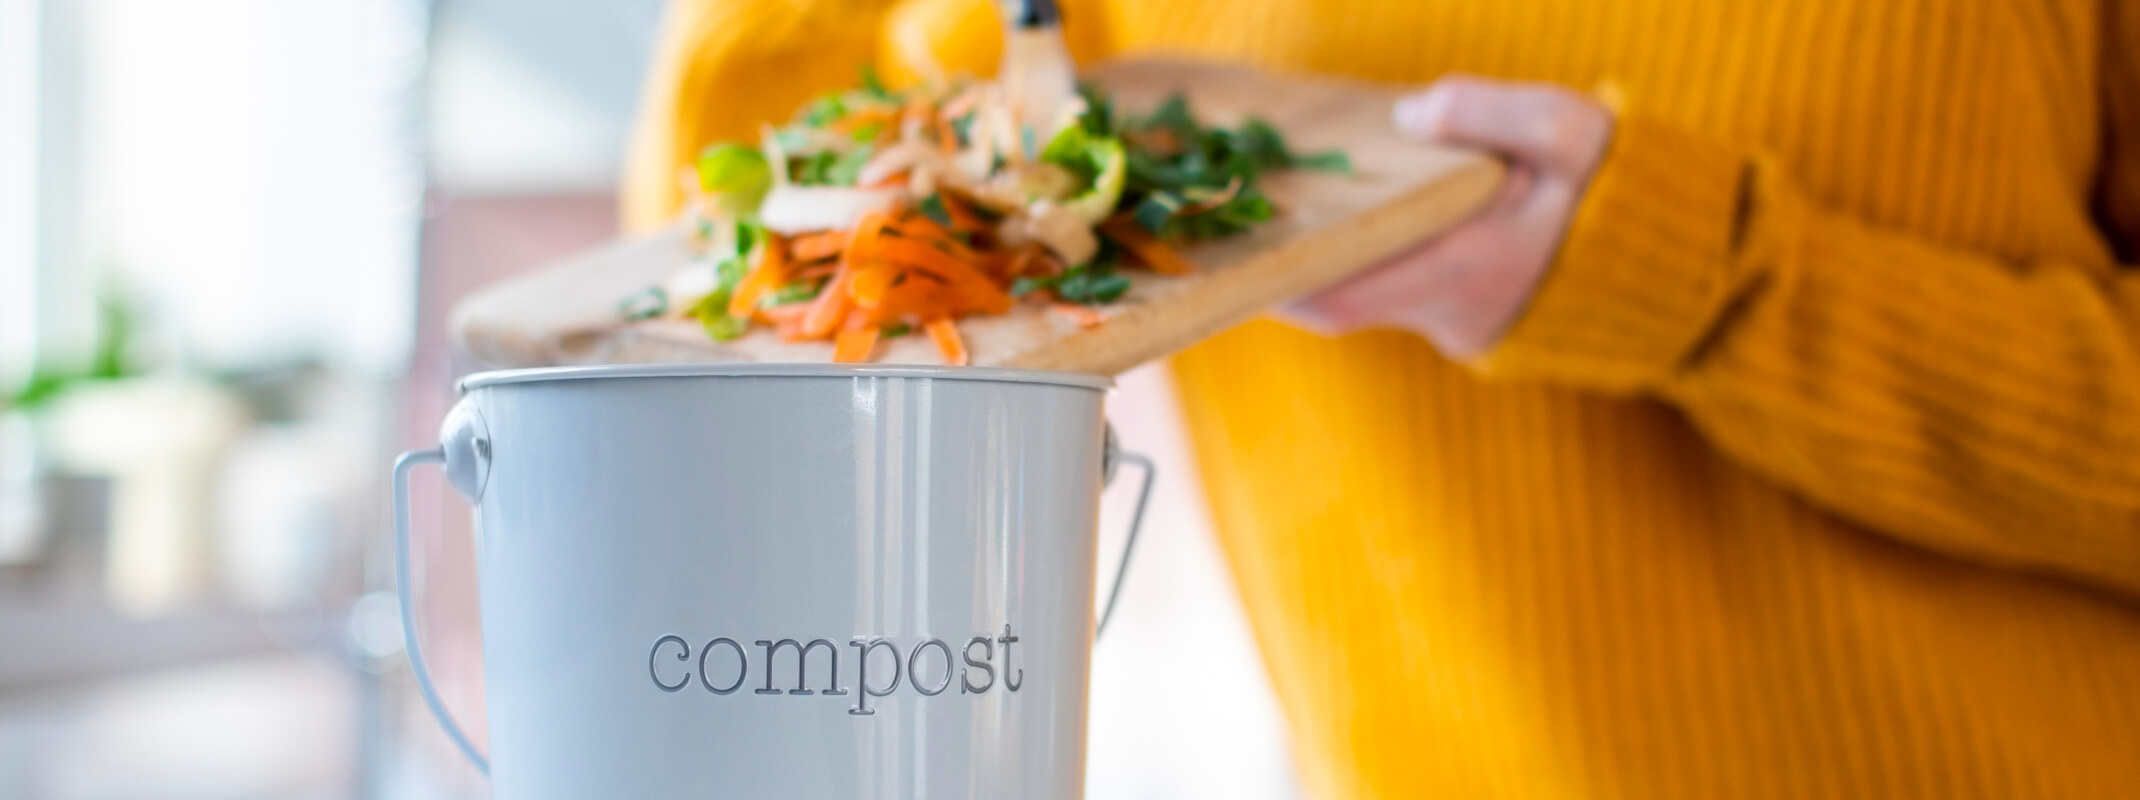 person scraping food scraps into a bucket that says compost